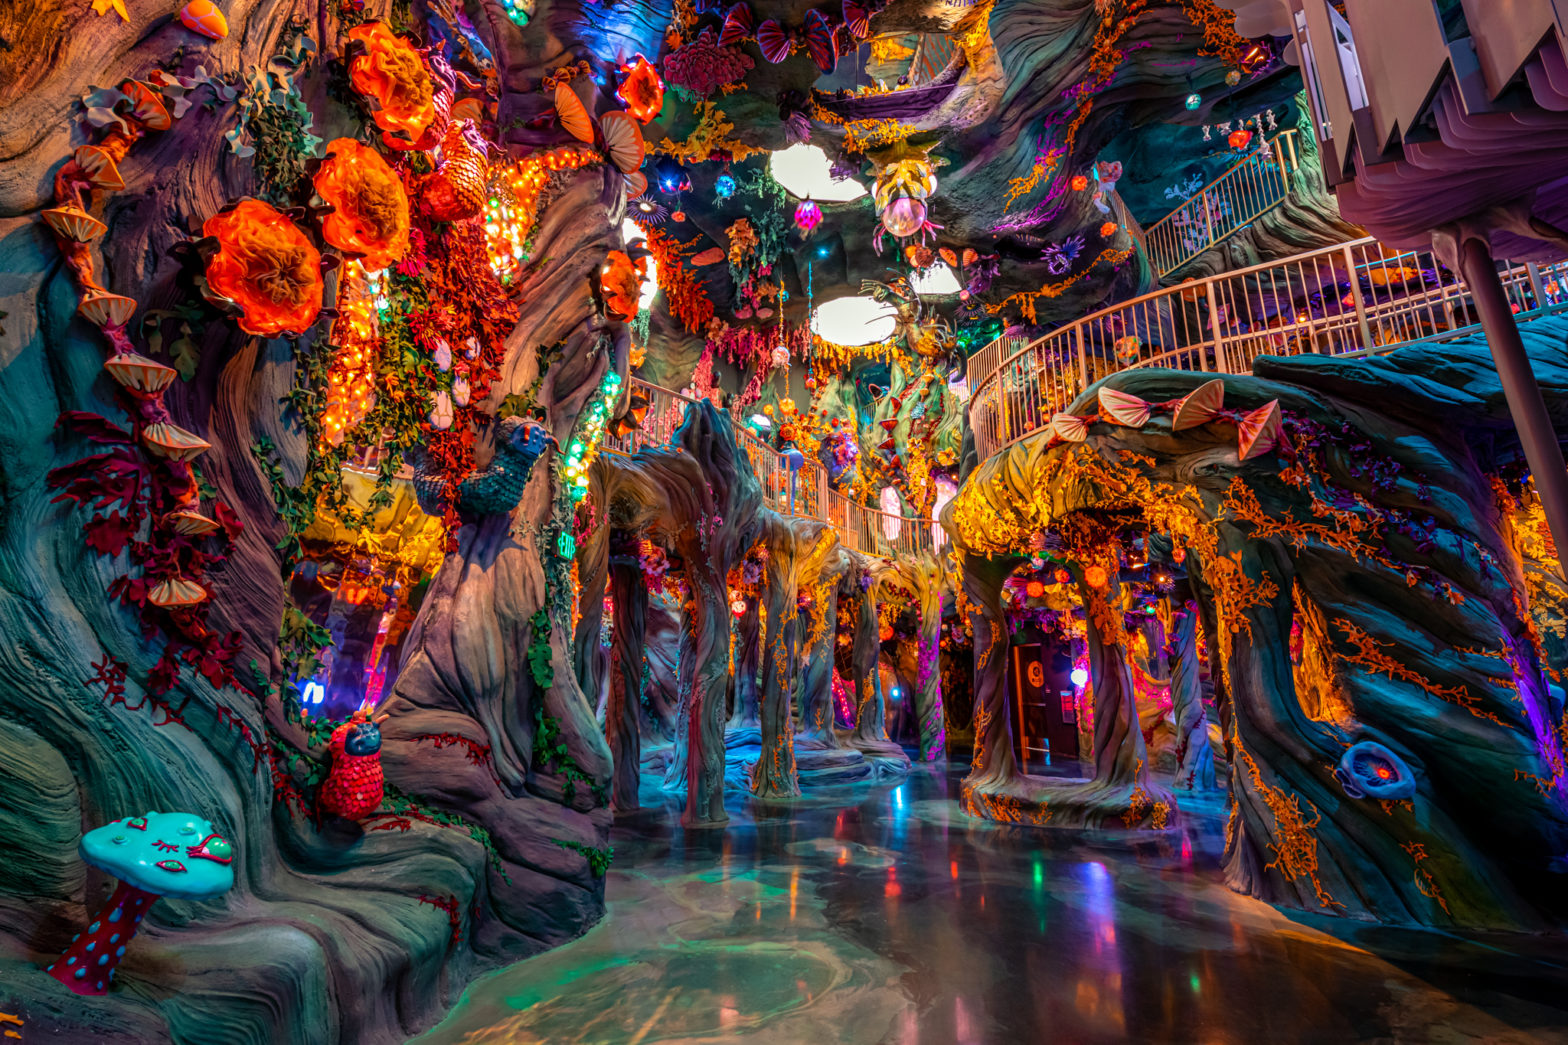 Travel To Another World At Meow Wolf Denver